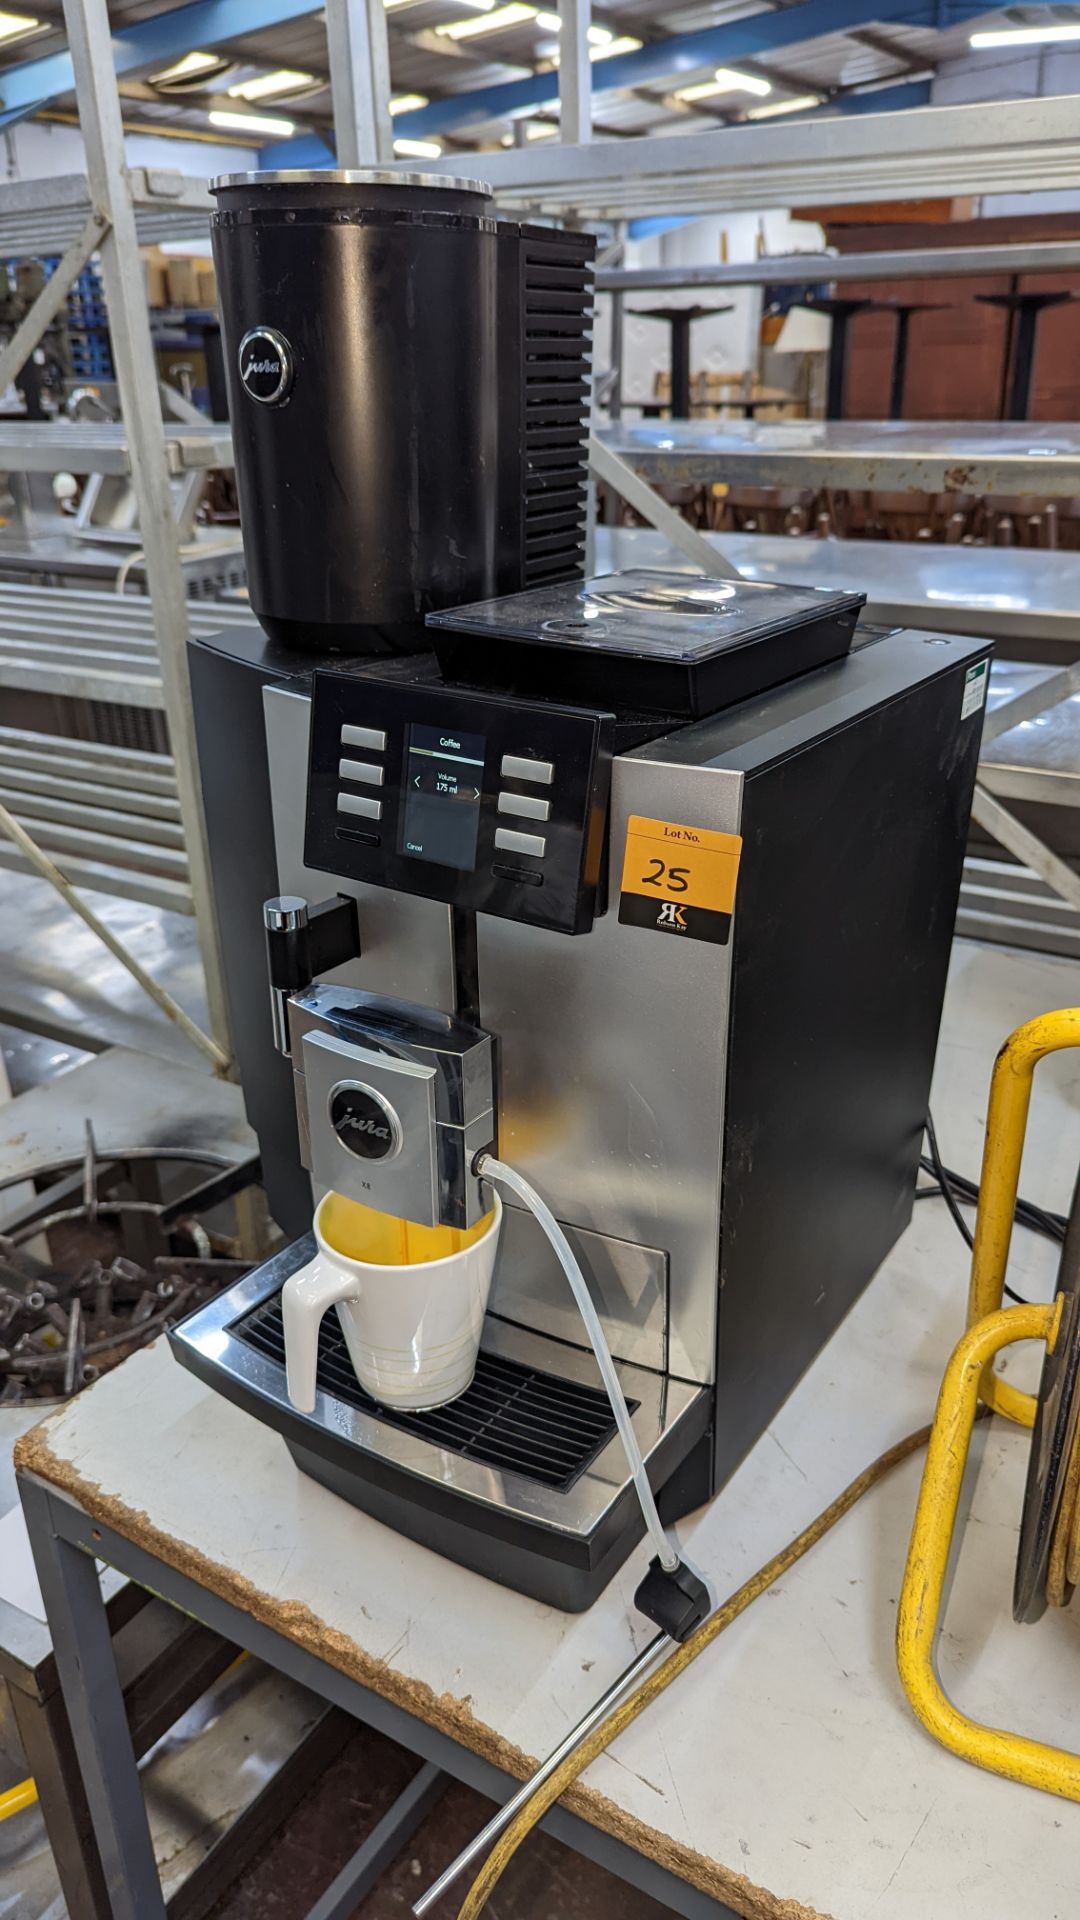 Jura X8 commercial bean-to-cup coffee machine, plus Jura Cool Control refrigerated milk accessory - Image 4 of 12